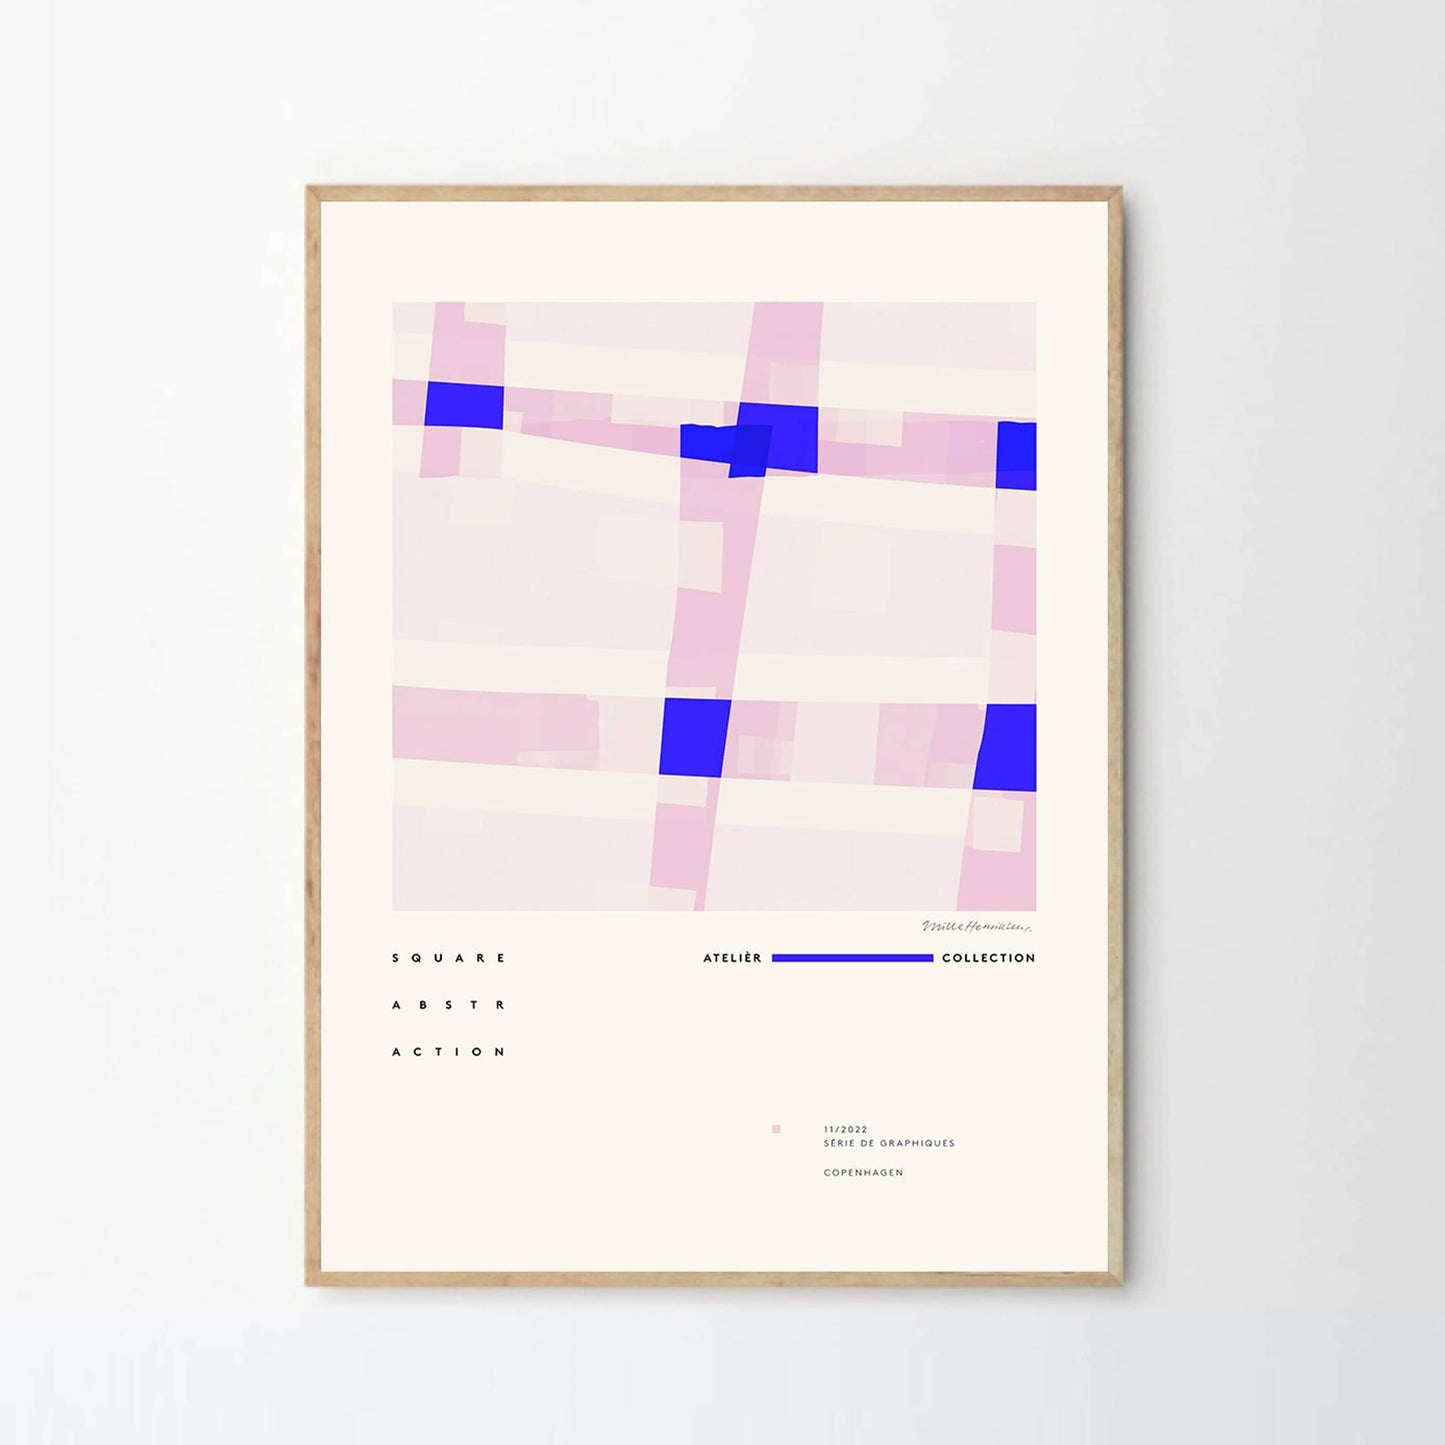 Square Abstraction Print 50Cm X 70Cm